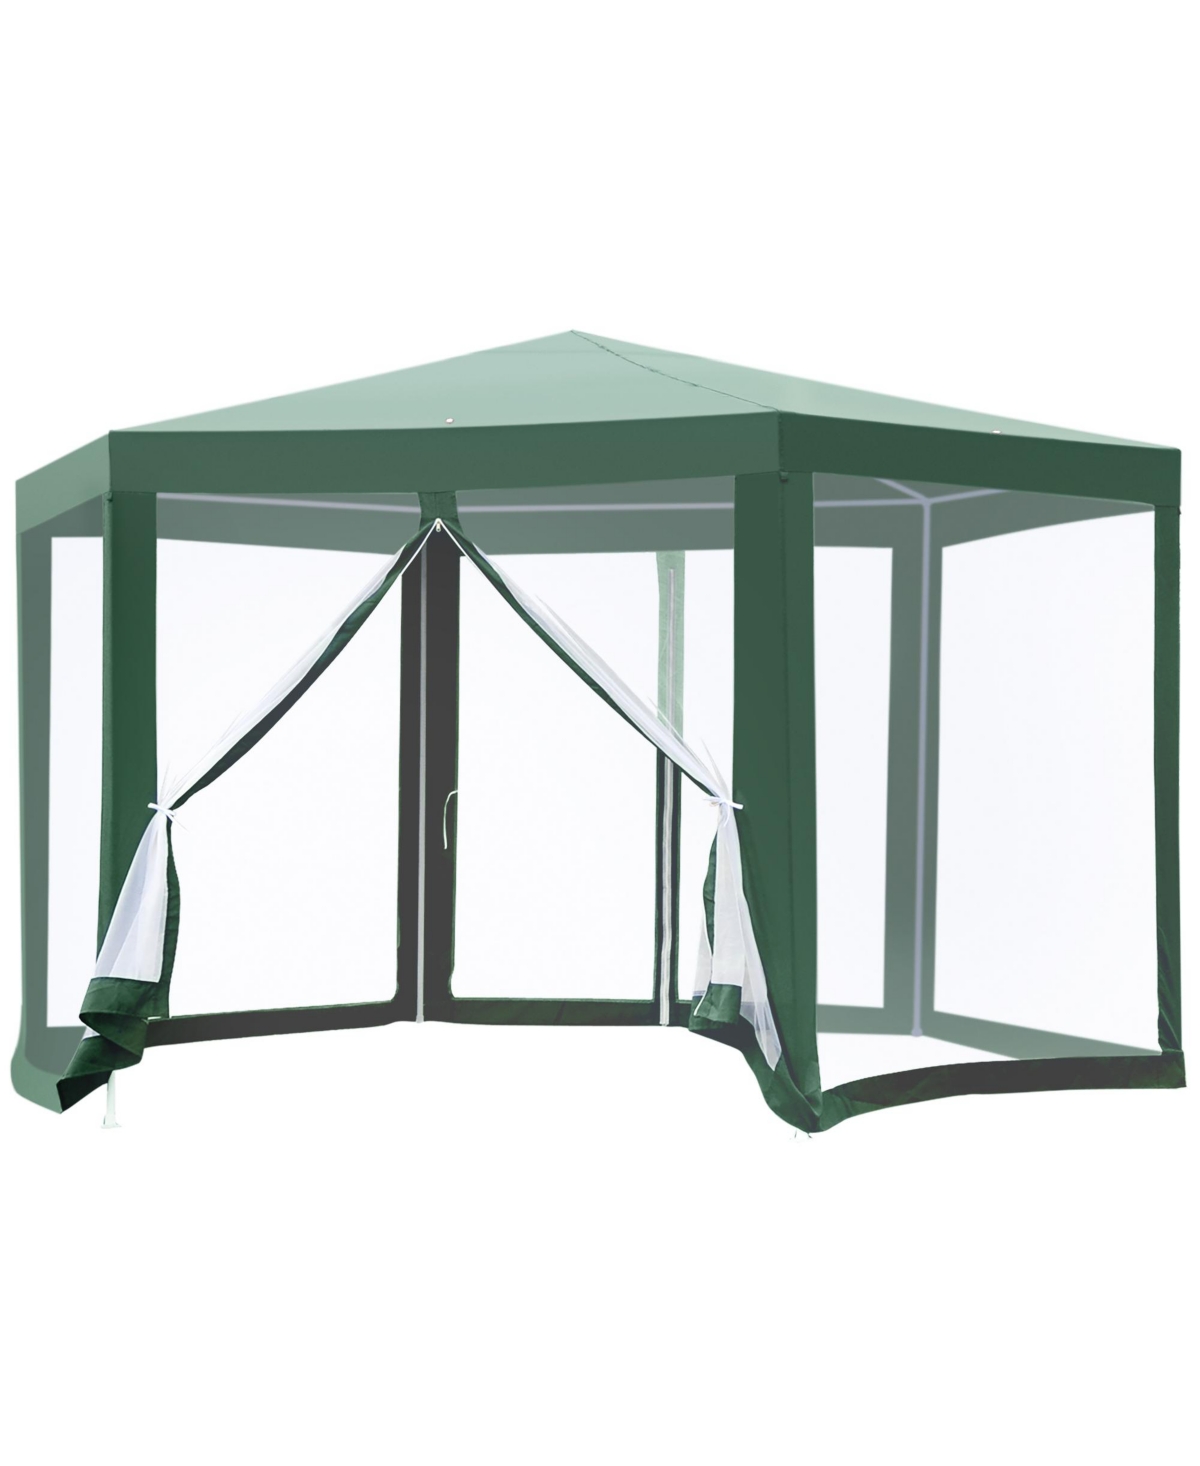 Outdoor Party Tent Hexagon Sun Shelter Canopy with Protective Mesh Screen Walls & Proper Sun Protection, Green - Green